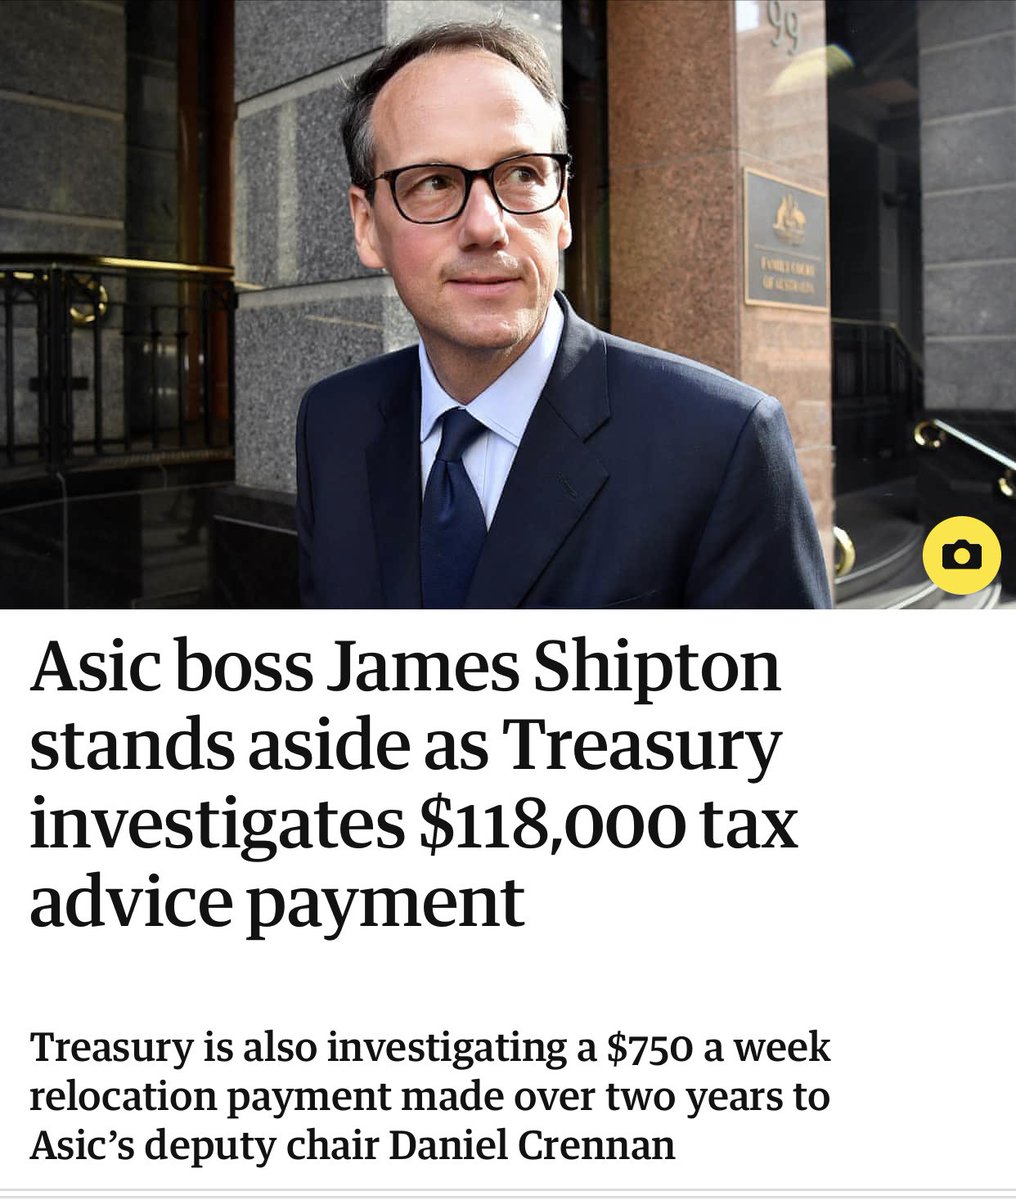 James Shipton is boss of ASIC - the corporate policeman. This story is not getting nearly enough attention given both he and his deputy have been implicated in a corruption scandal